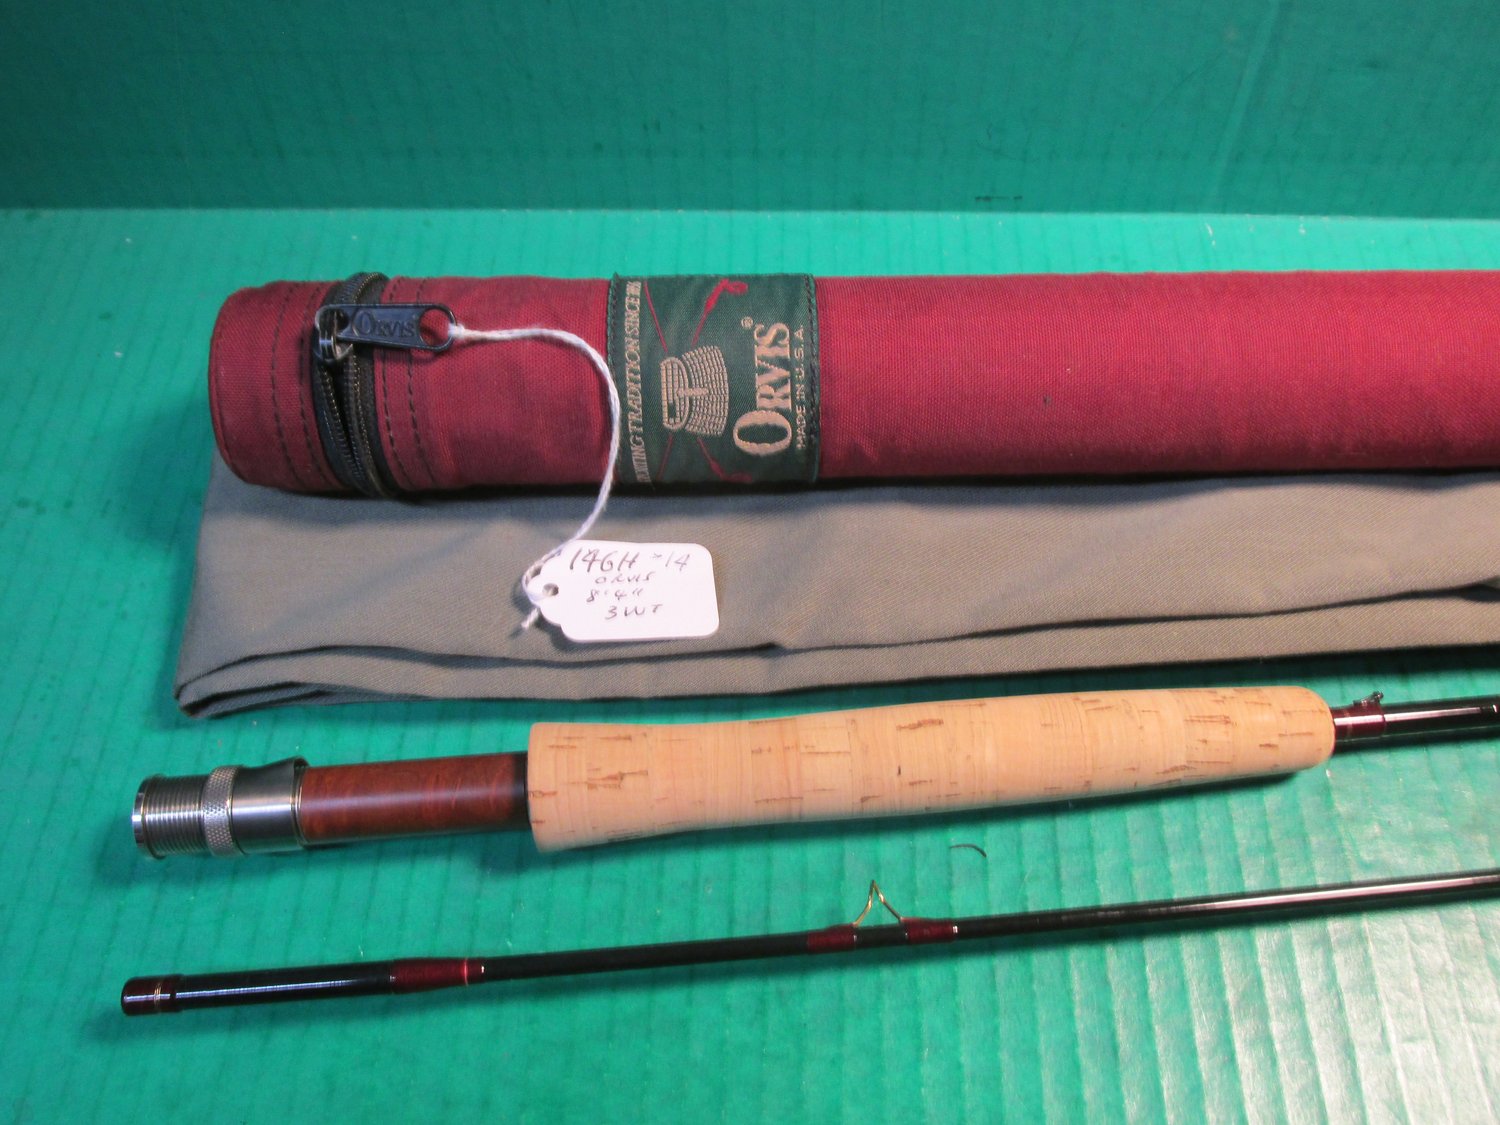 146h-14. Orvis Trident 3 Wt. — R.W. Summers Bamboo Fly Rods Company